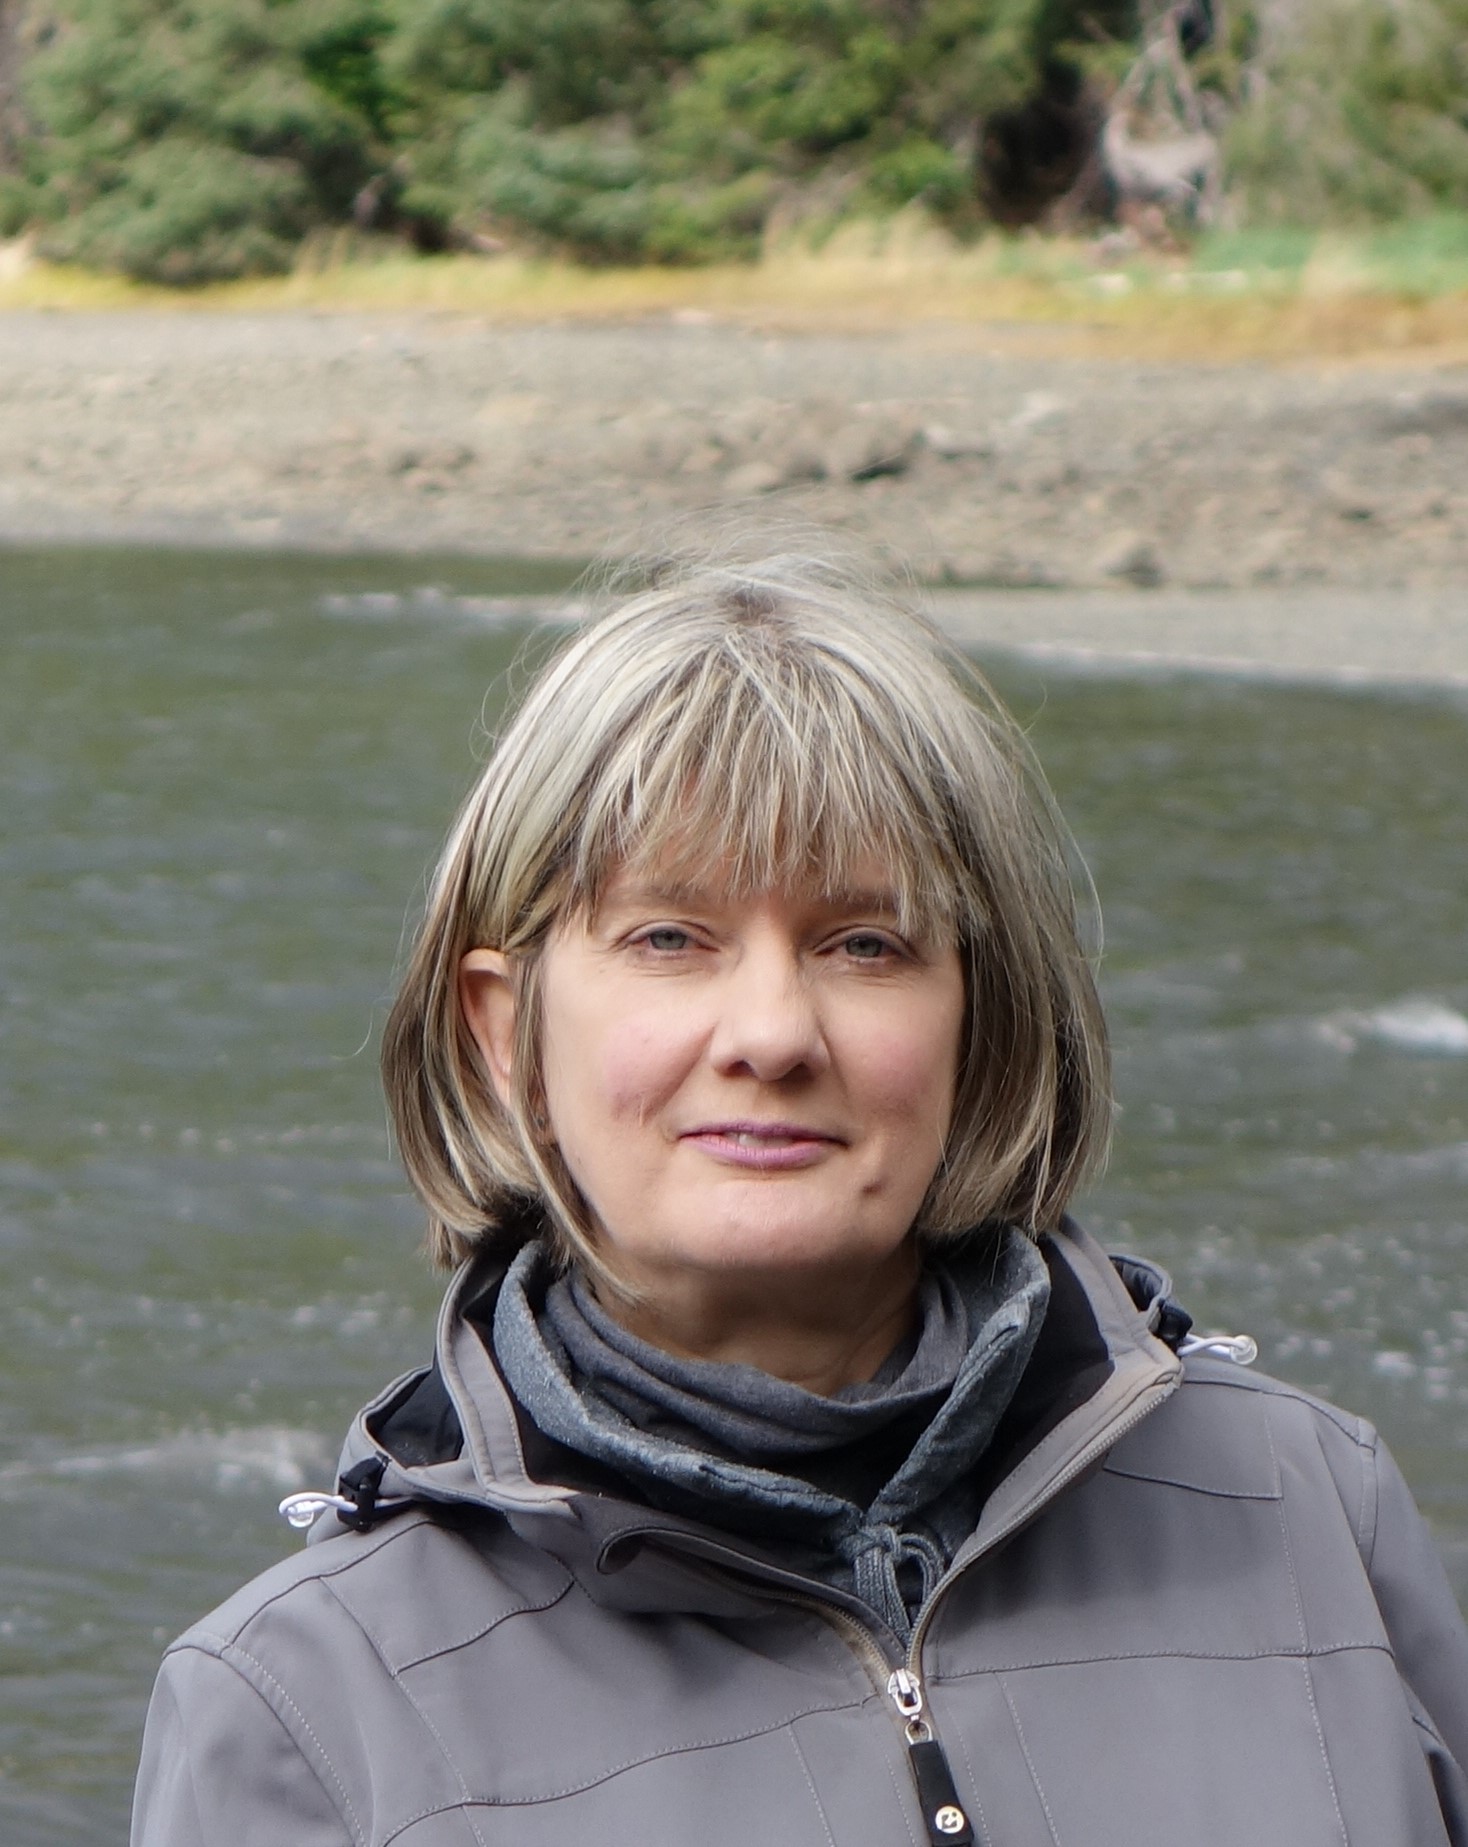 person with blond hair standing near water in a grey jacket 